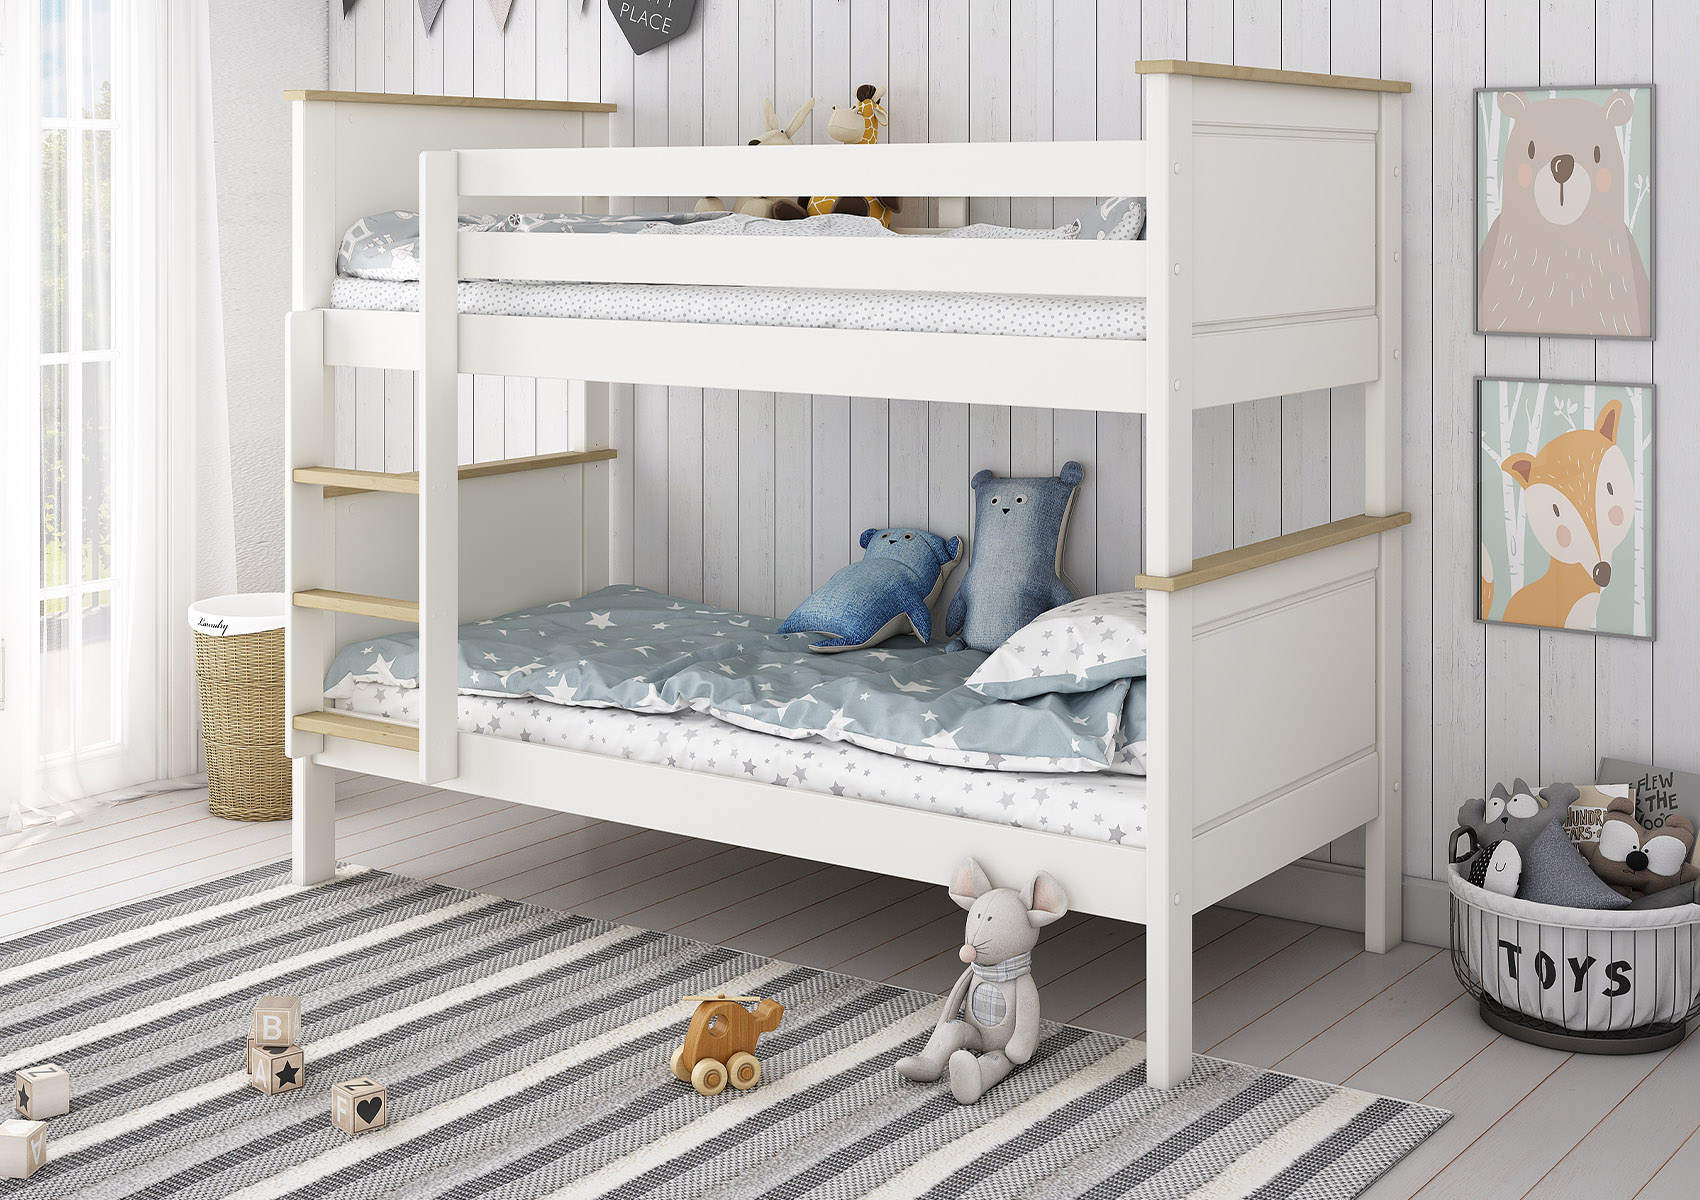 View Heritage White Bunk Bed Frame Time4Sleep information